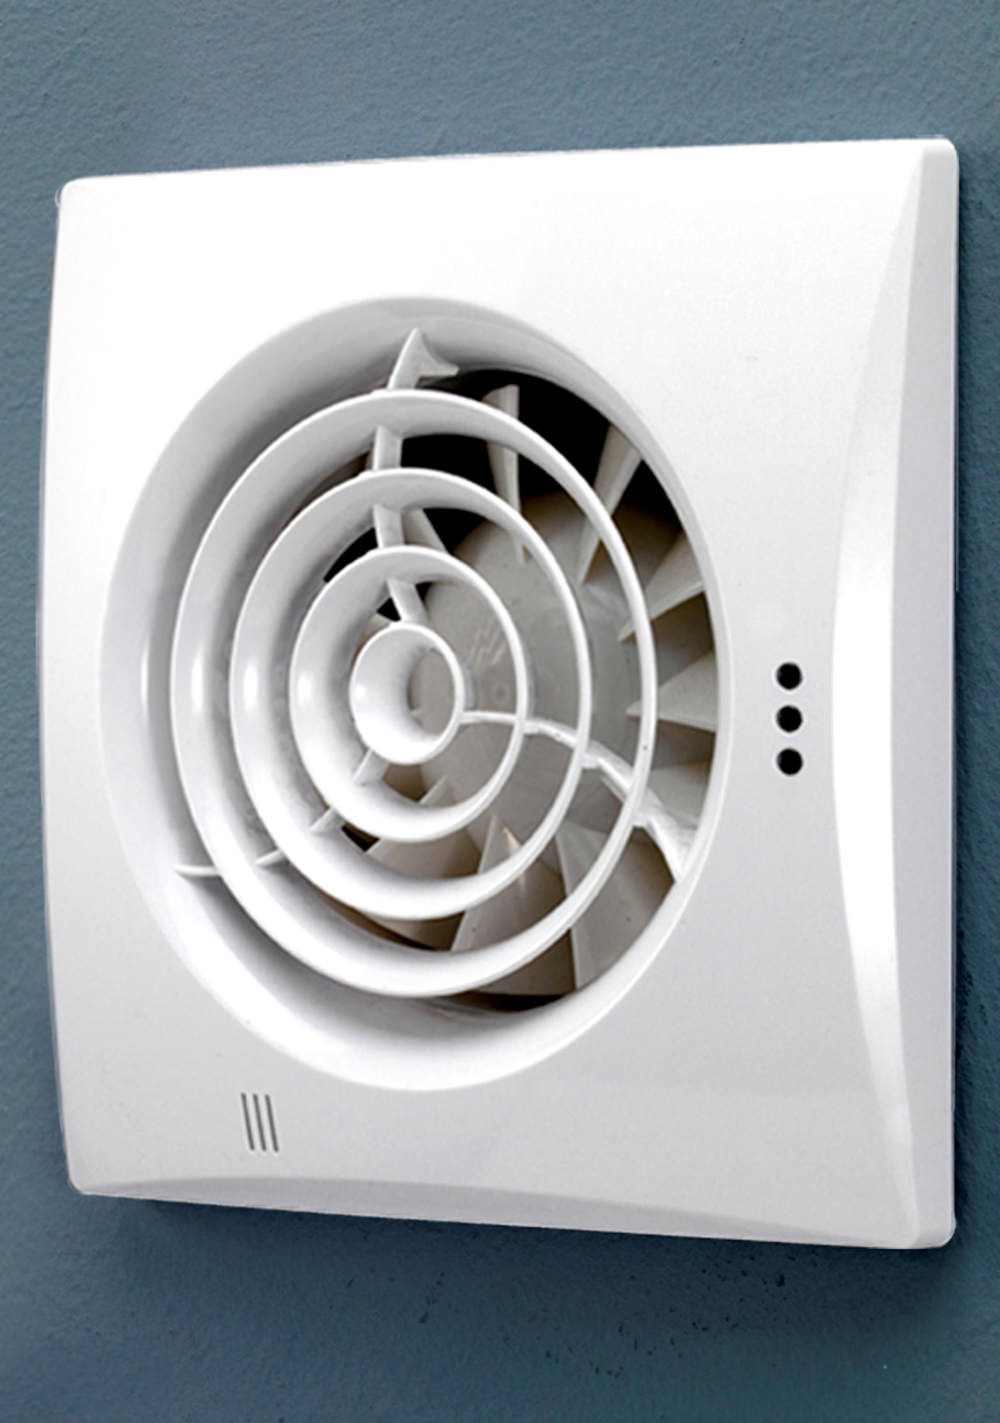 Hib Hush Wall Mounted Extractor Fan With Timer And Humidity Sensor pertaining to sizing 1000 X 1423